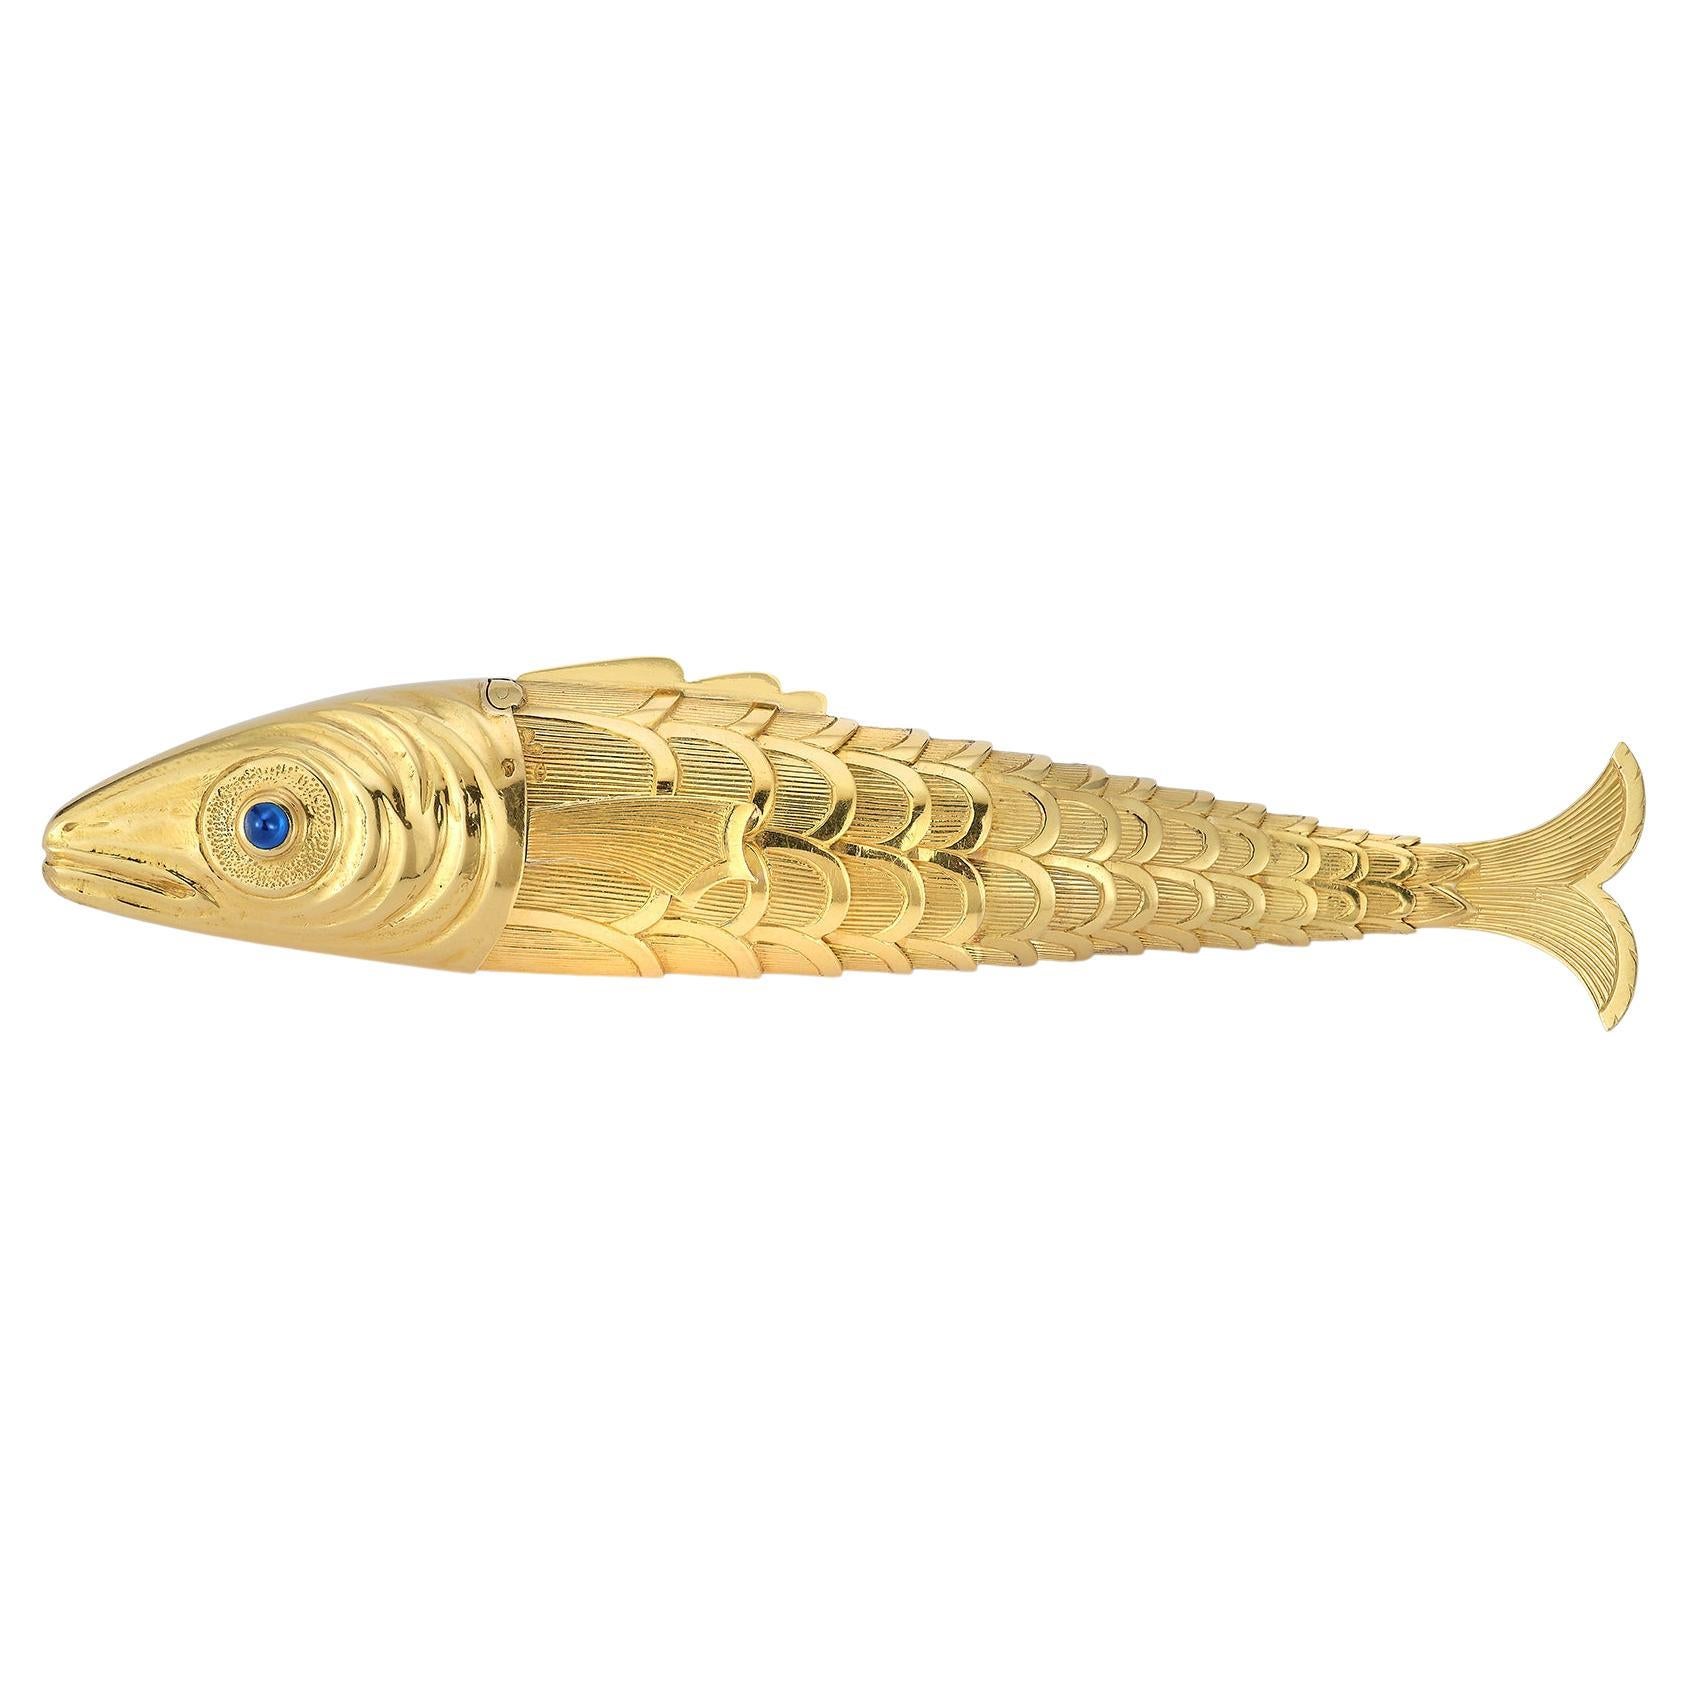 Schlumberger Gold Fish Lighter
Made circa 1939.  
A flexible goldfish with textured gold scales set with a cabochon sapphire and ruby as eyes,
18k yellow gold. 
The head that flips open to reveal a lighter mechanism.

Measurements: 4.25